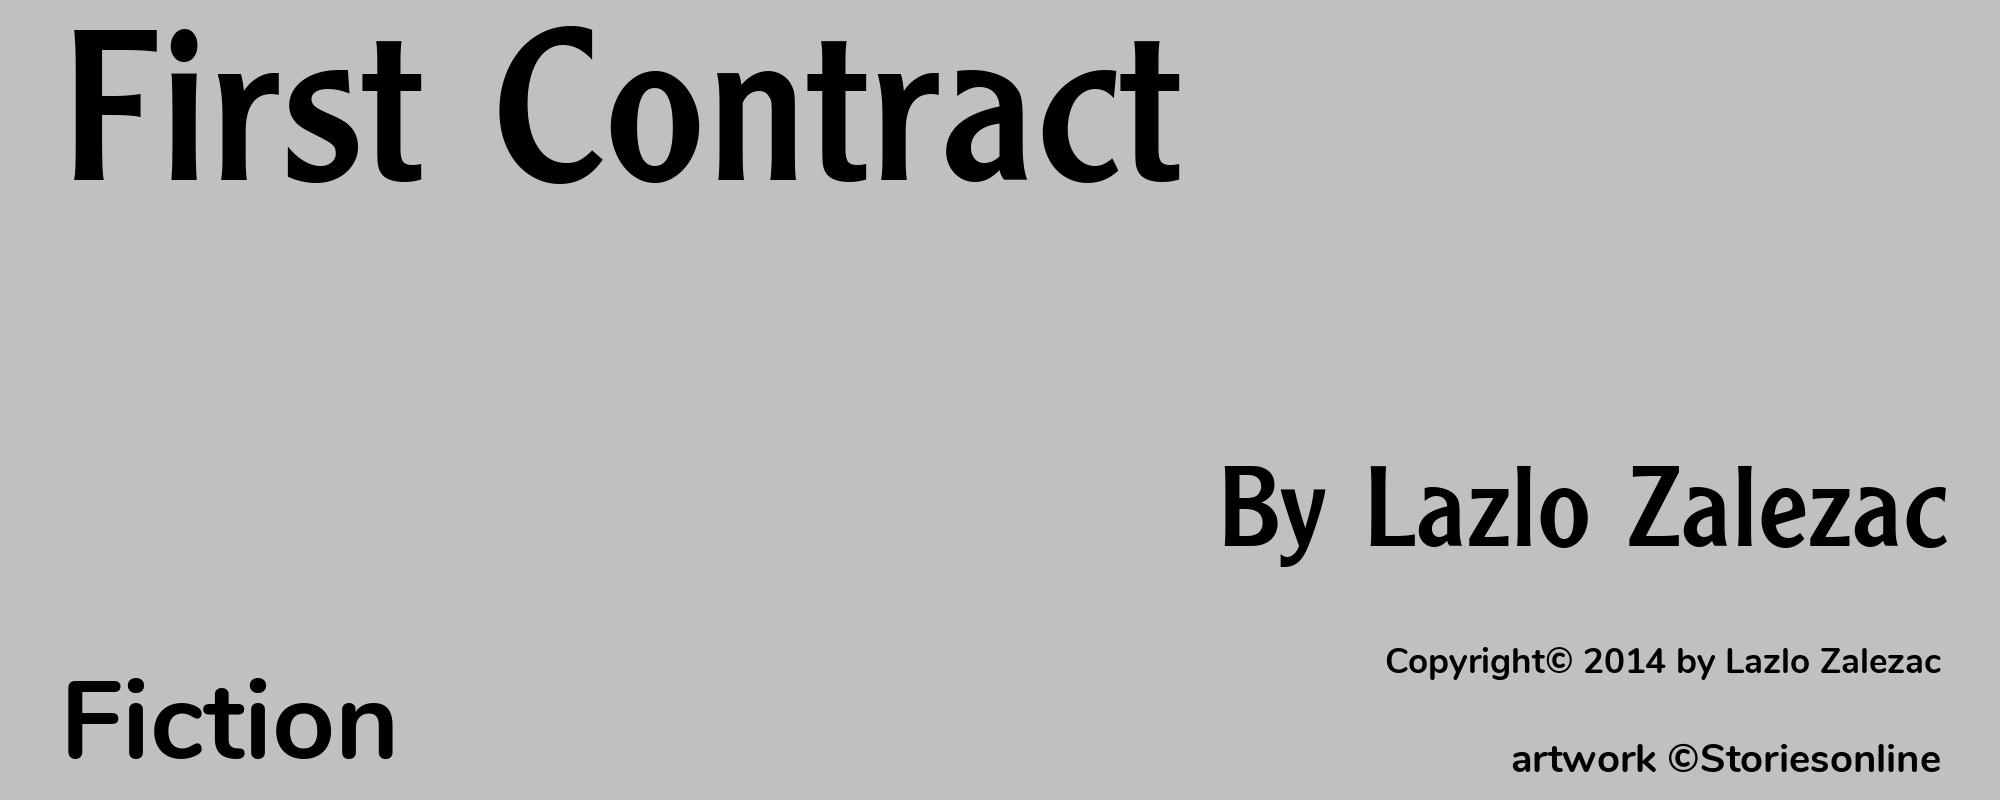 First Contract - Cover